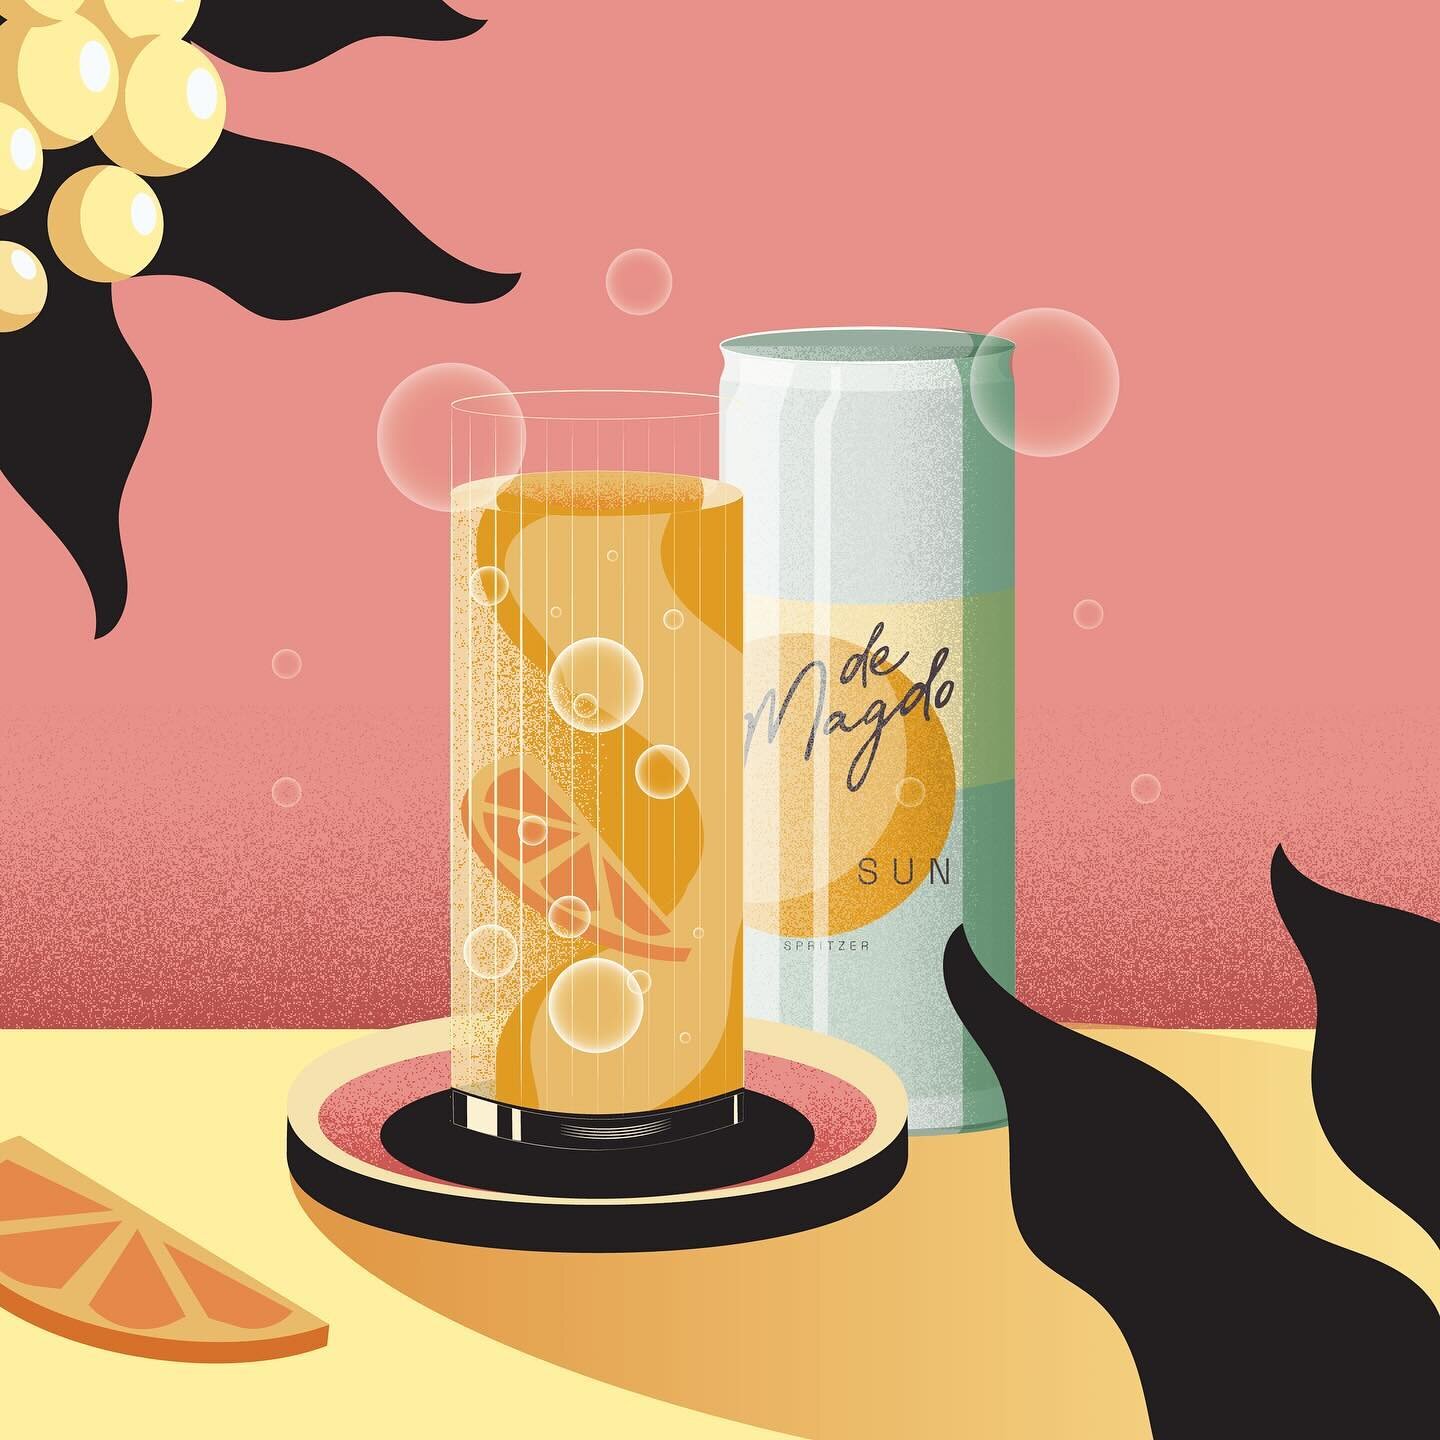 Fun work with vibrant vector illustrations that capture the essence of @demagdo.spritzers with a playful and cool twist. These illustrations bring the refreshing drink to life, featuring a delightful blend of colors and a lighthearted style.😁 #illus